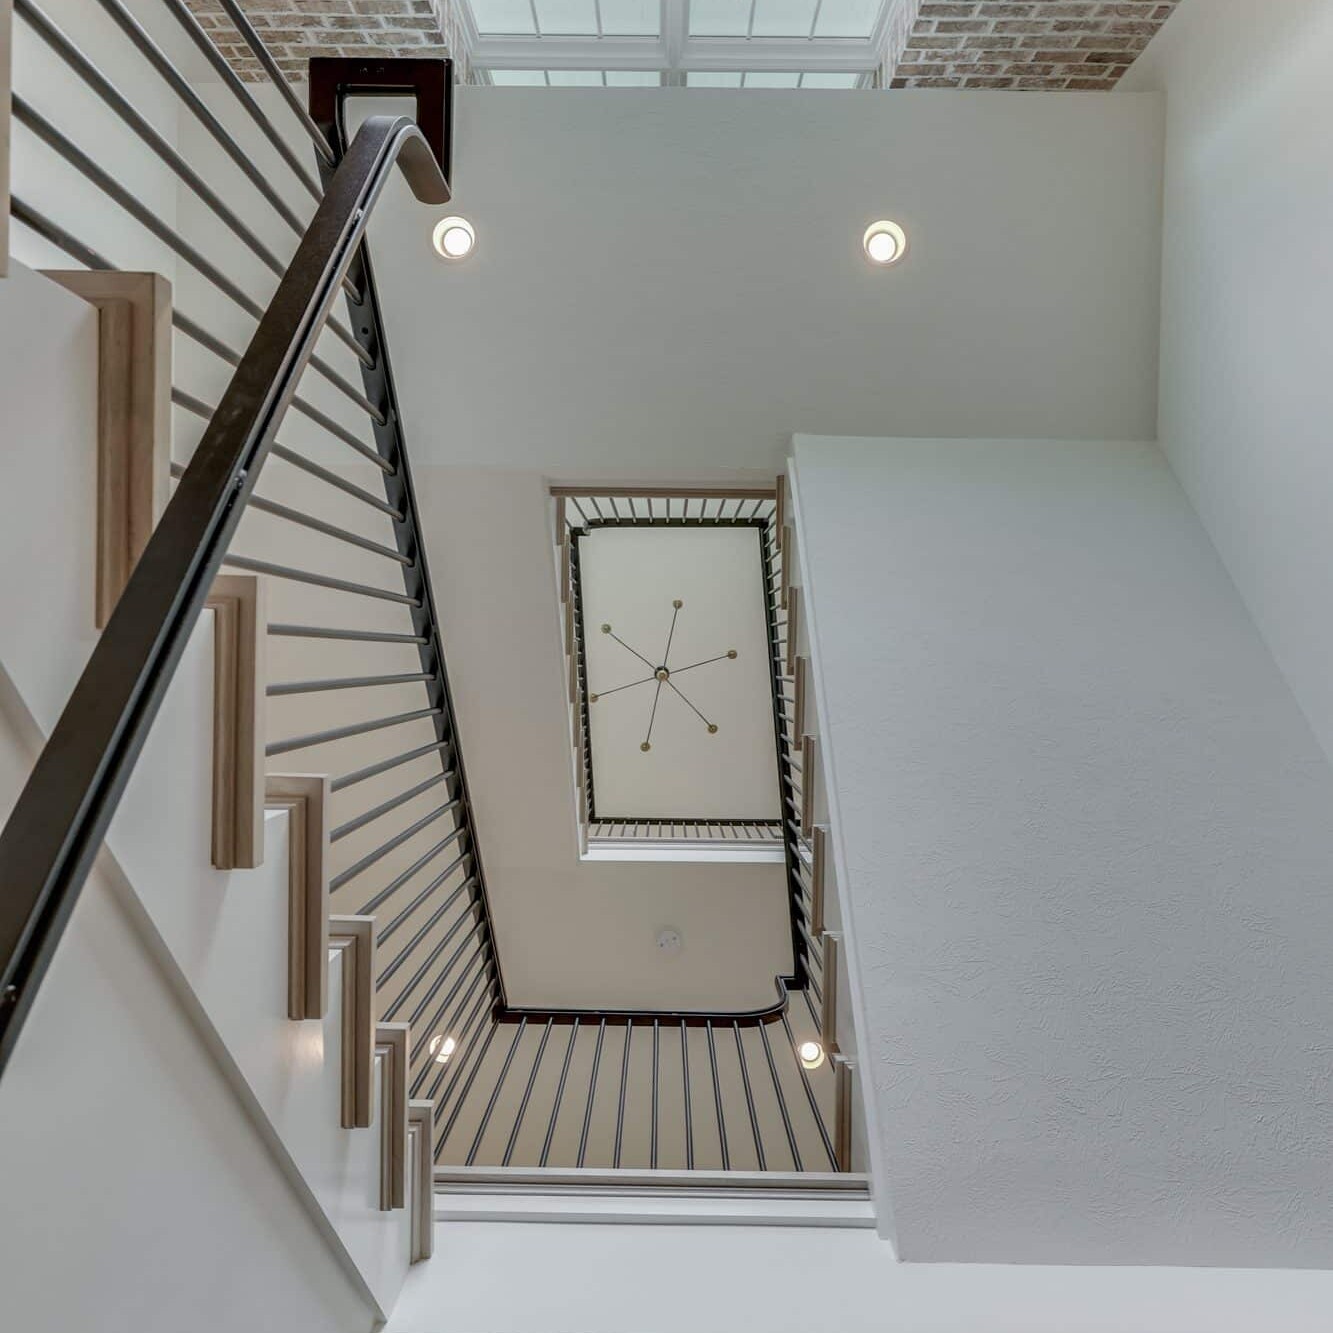 A white staircase with a skylight in the middle.